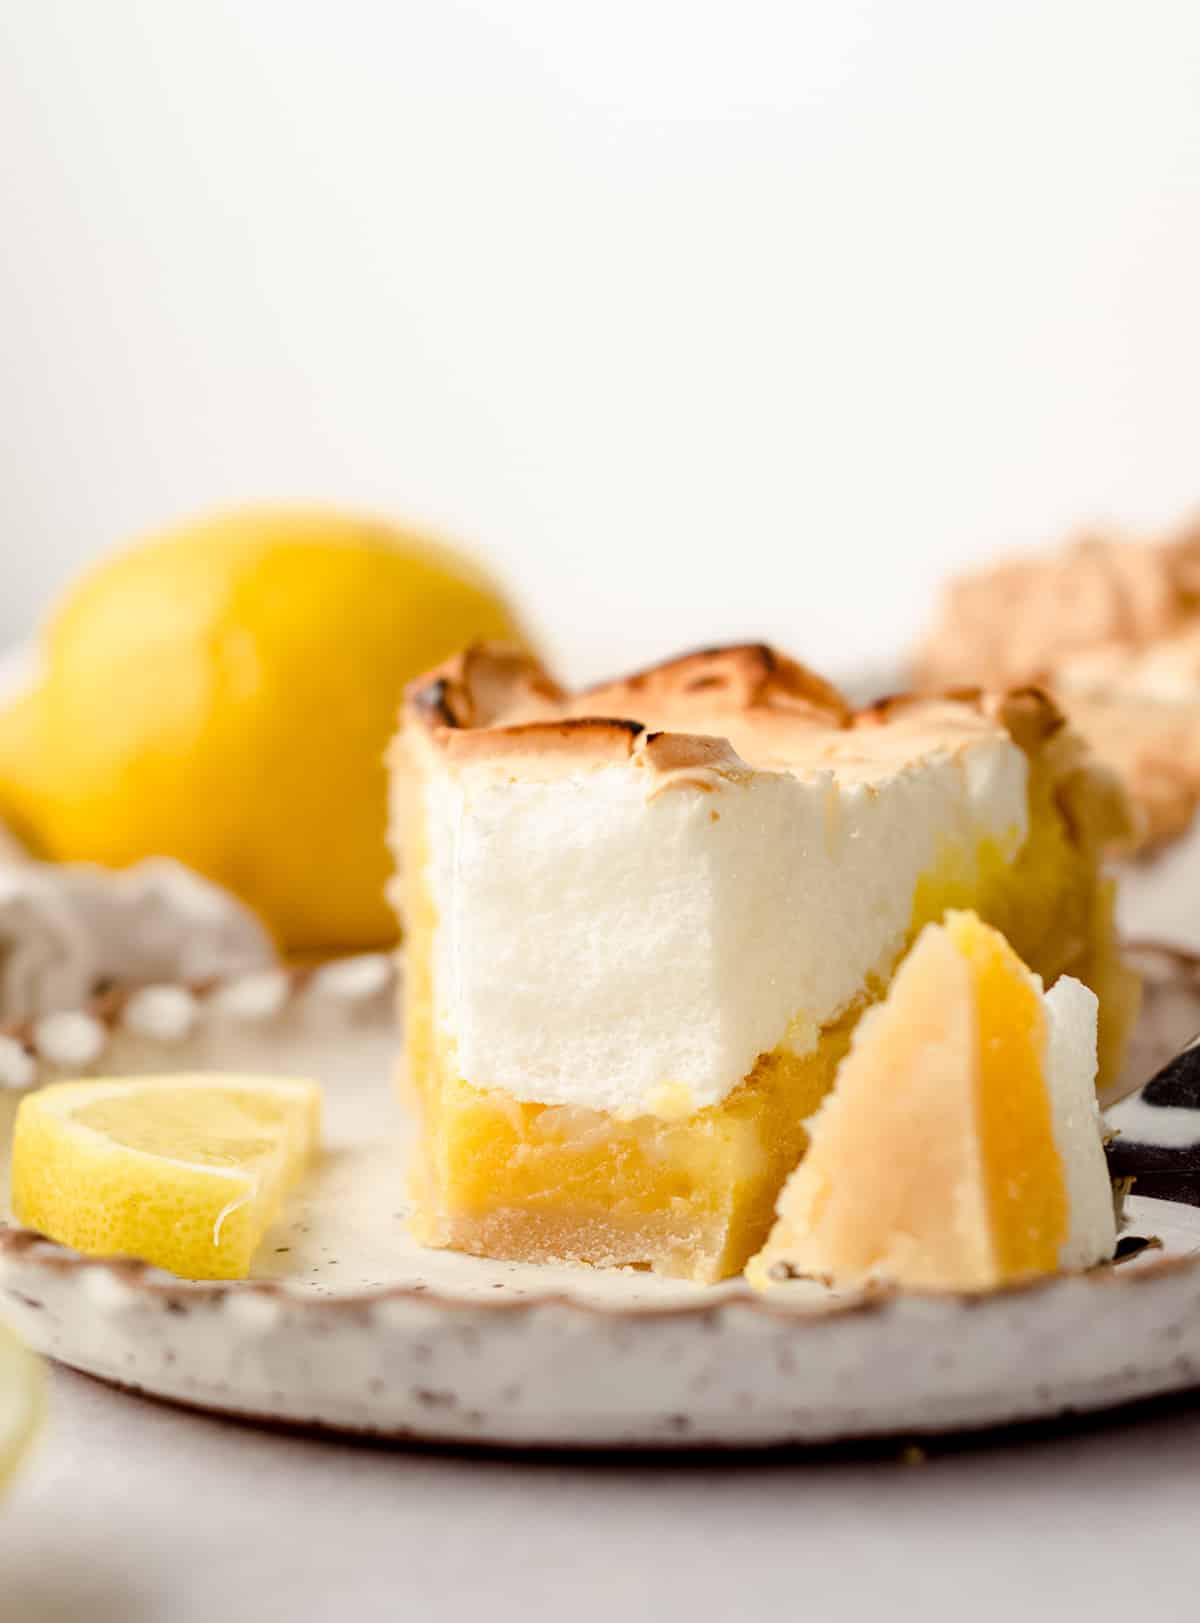 A slice of lemon meringue pie with a forkful taken out.